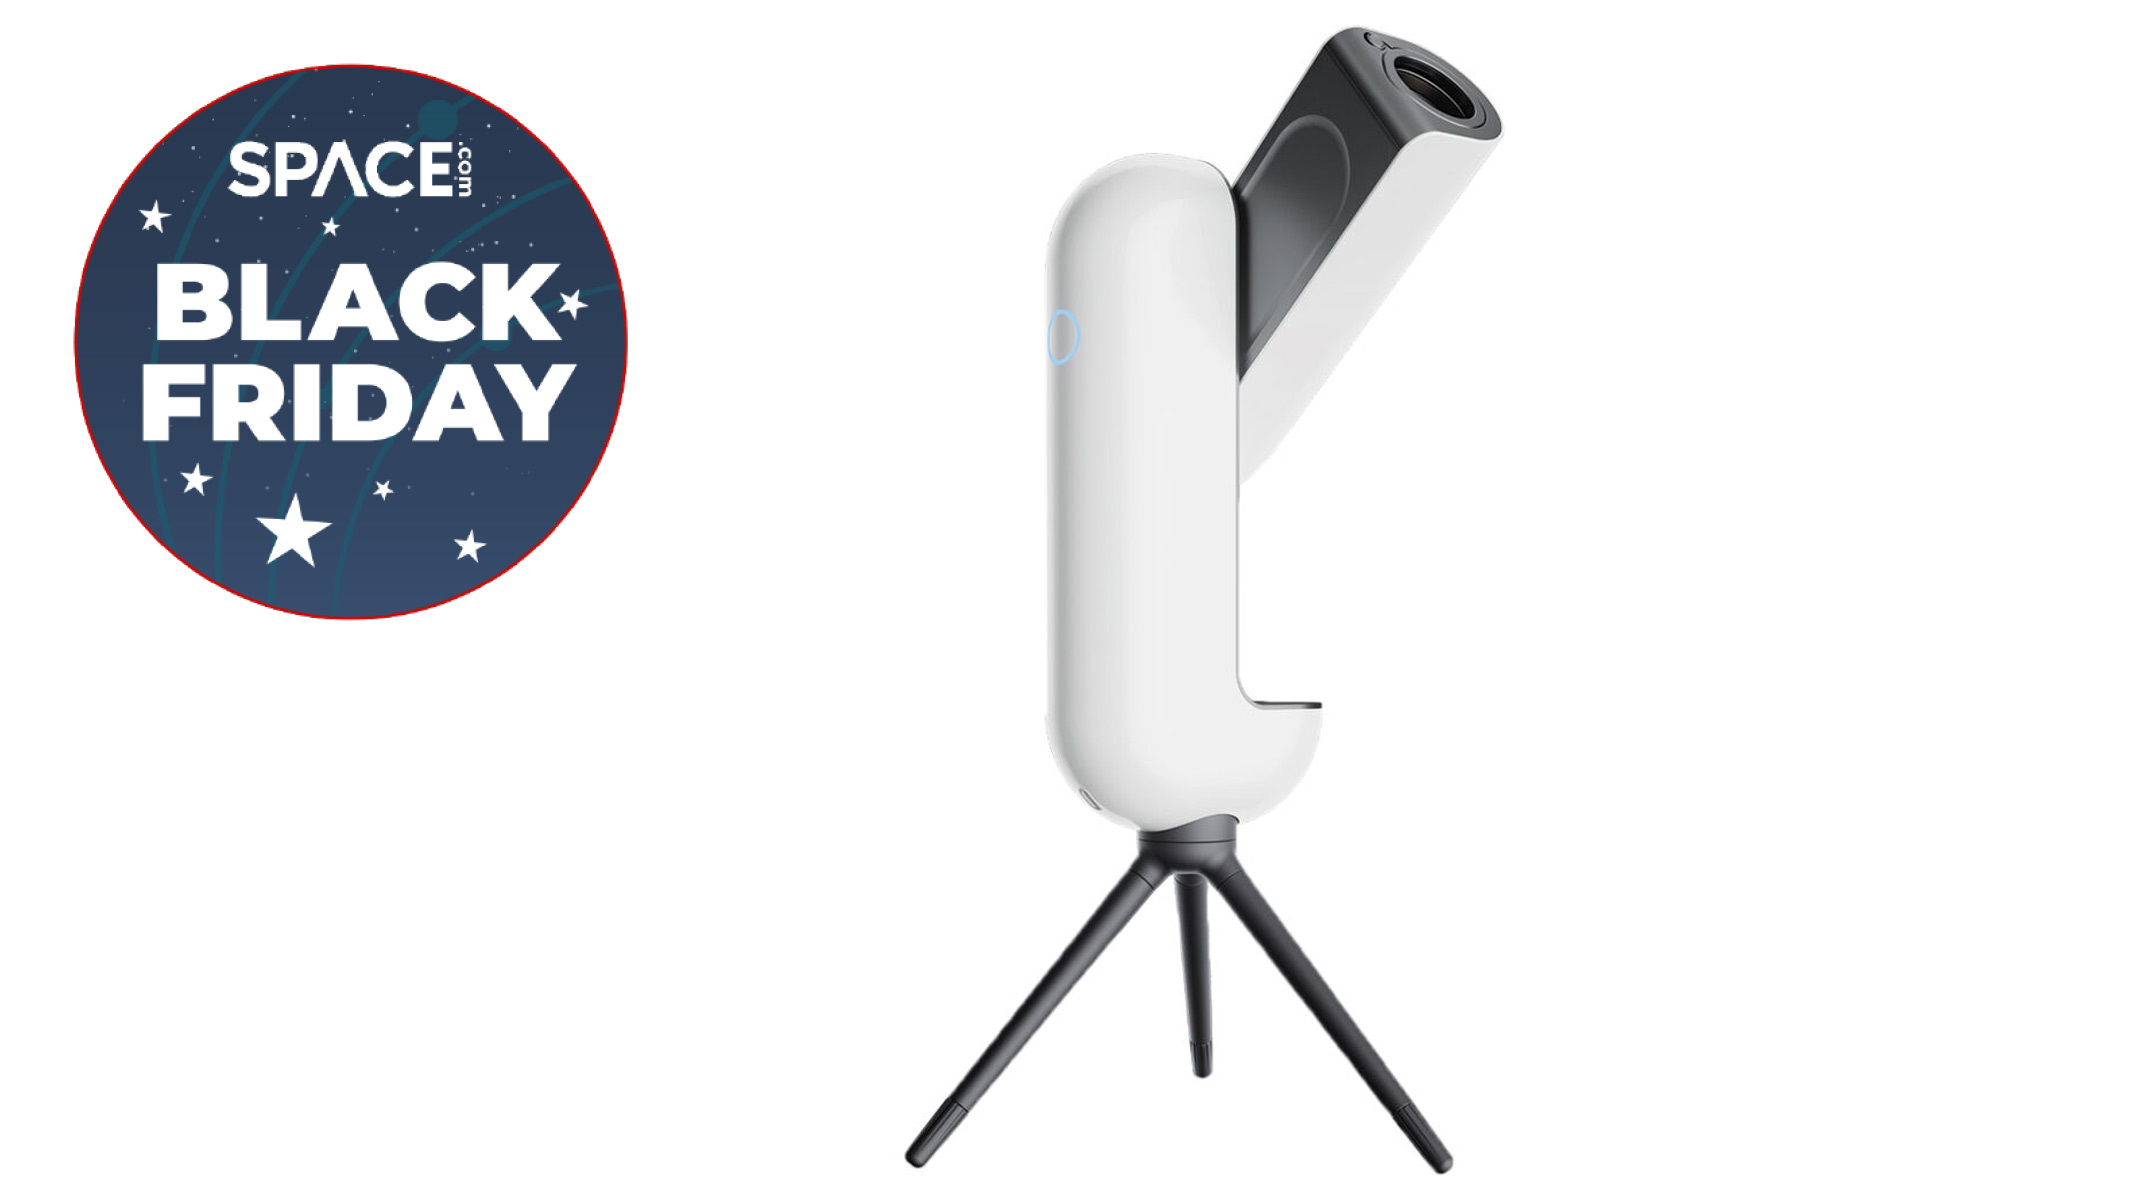 Charotar Globe Daily Vaonis vespera smart telescope on a white background with black friday deal logo